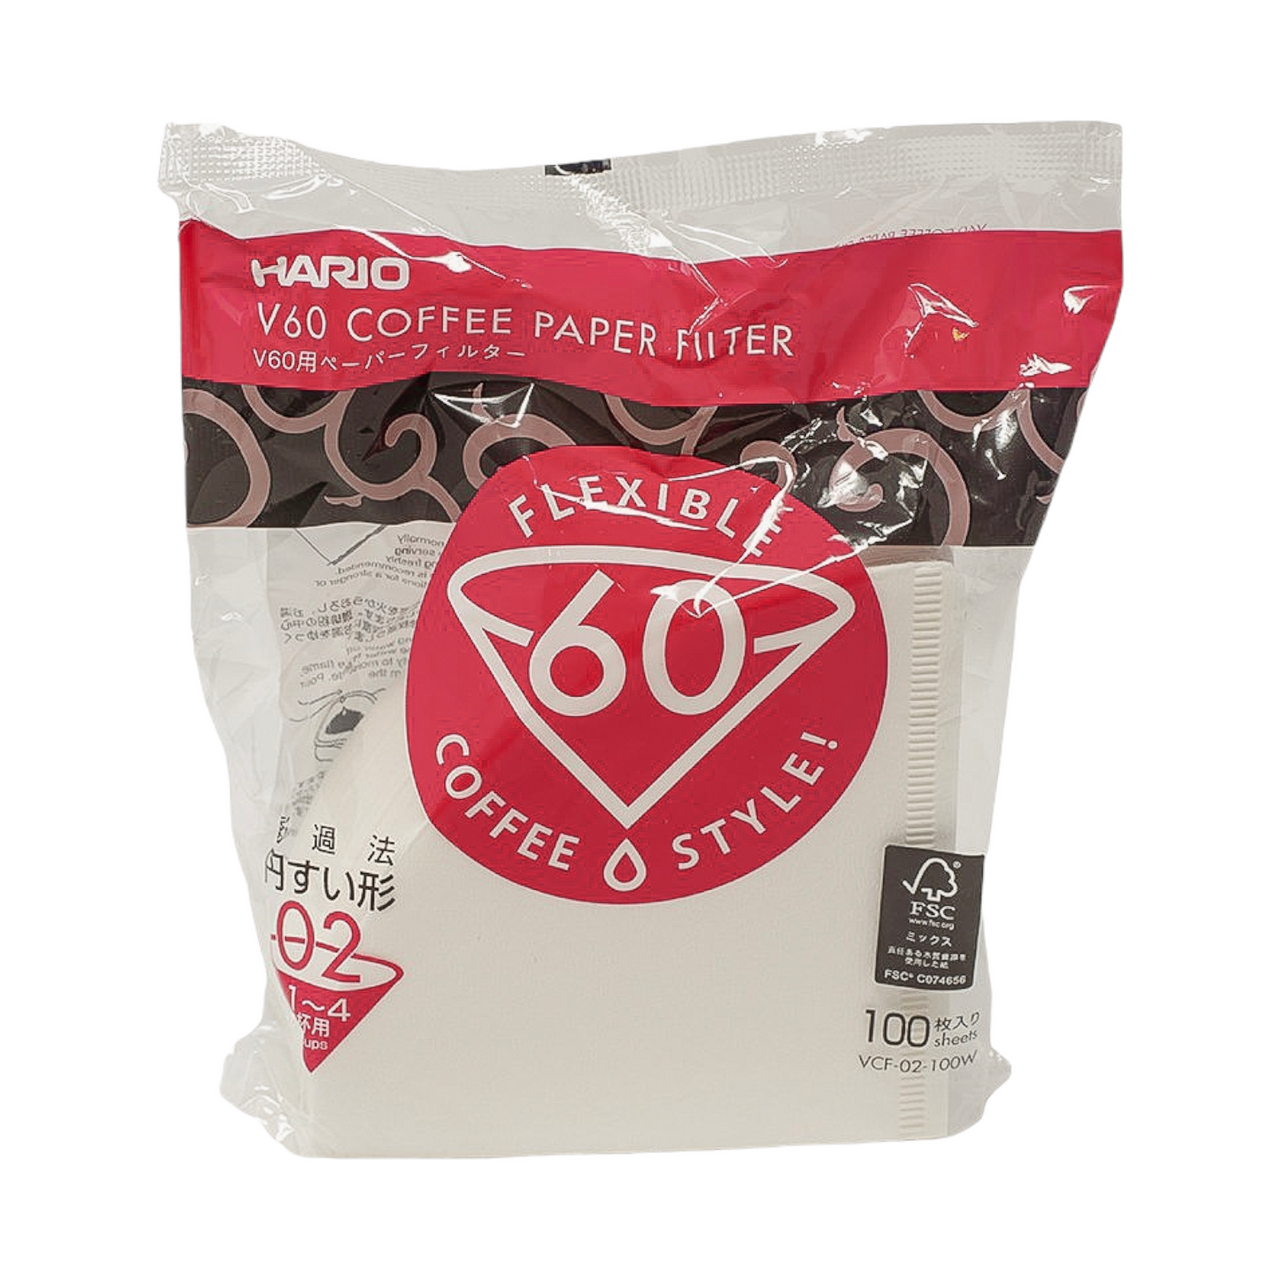 Hario V60 Filters (100 Pack)